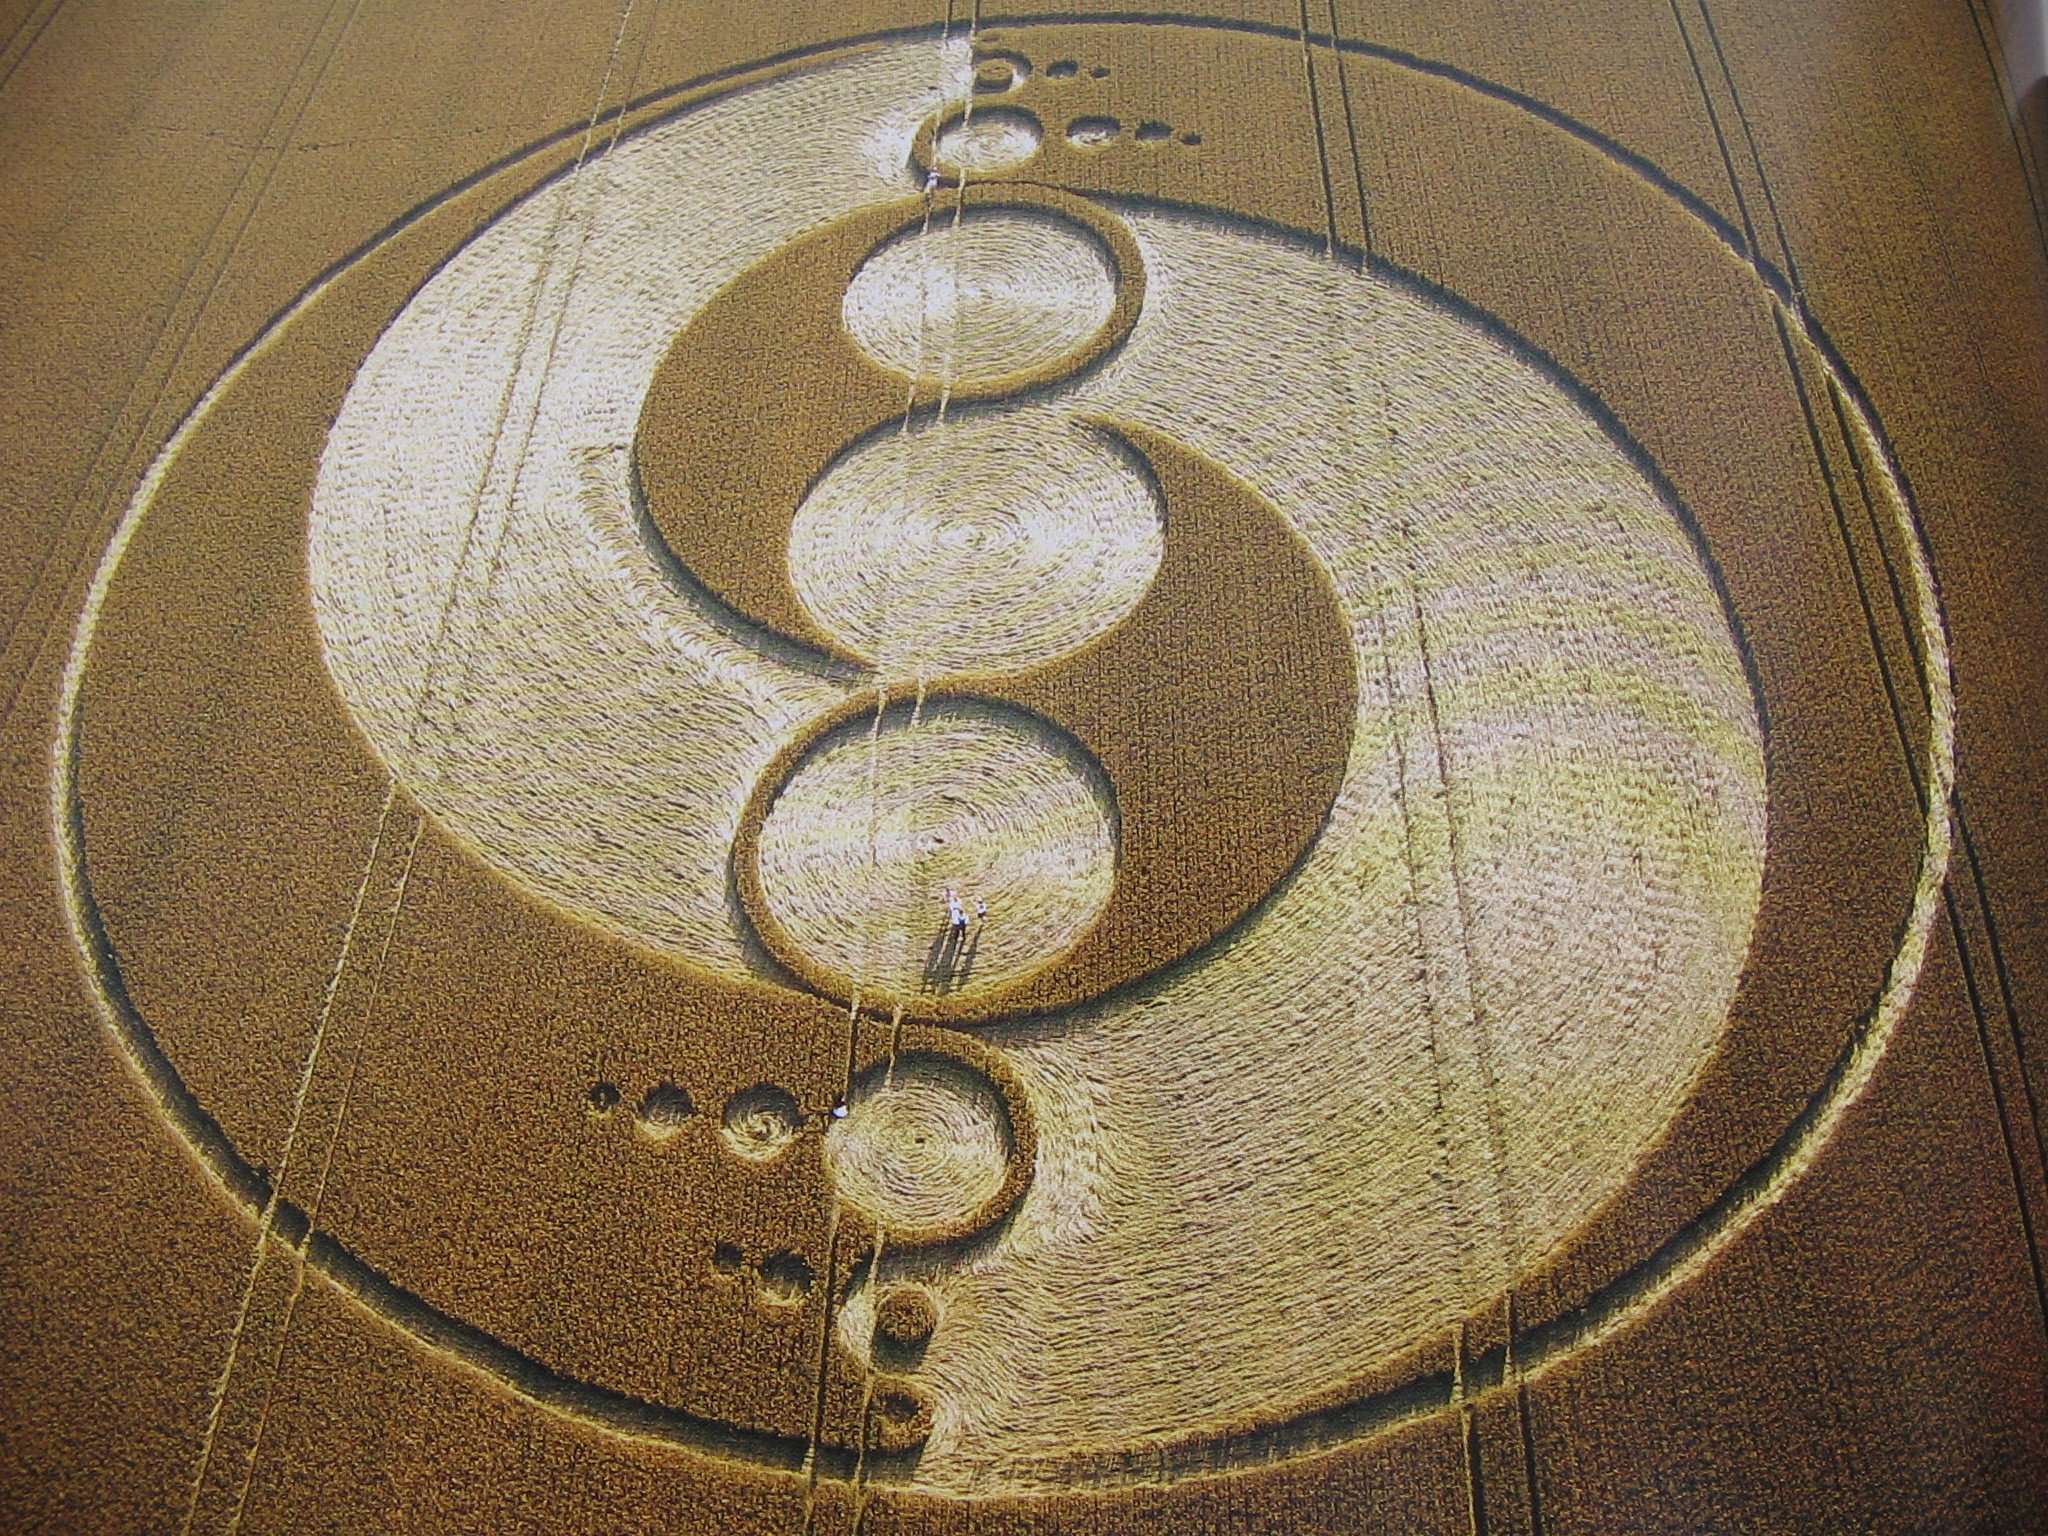 Crop Circle is a great wallpaper for your computer desktop and laptop